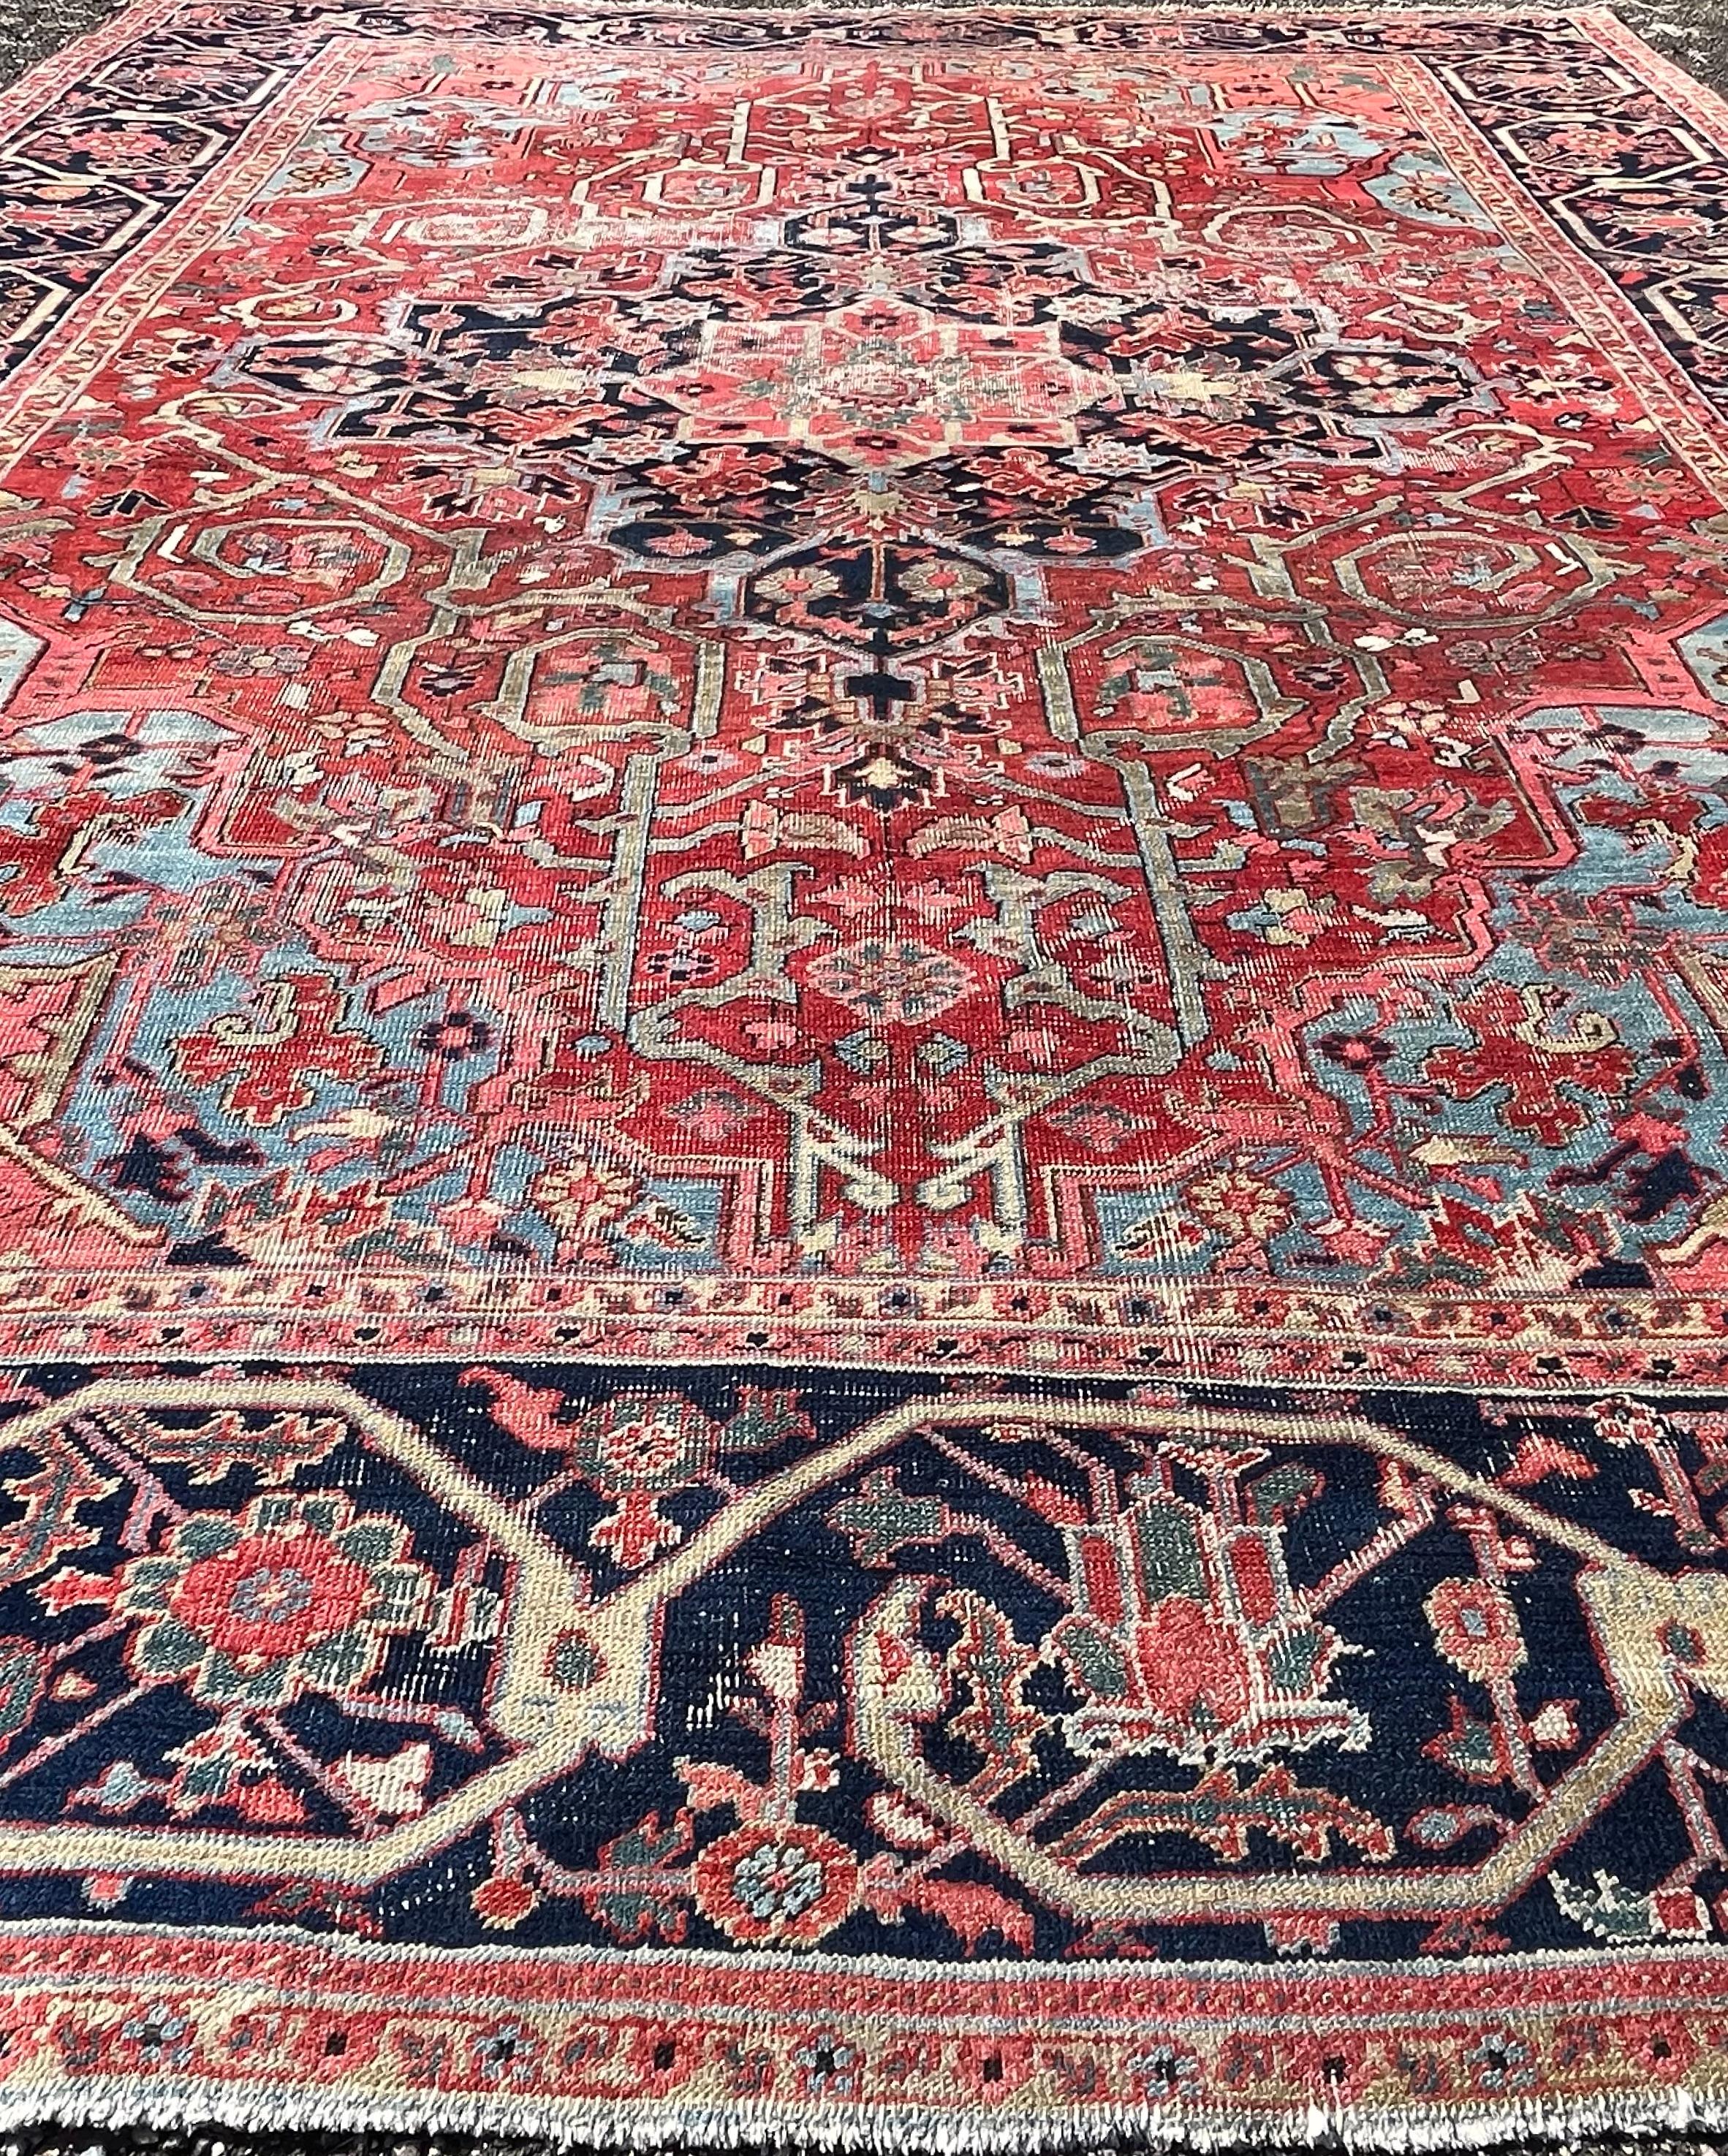 Antik Heriz Carpet Circa 1900/1910
Carpets from northwest Persia are in a class of their own. Appreciated for their strong geometric style, refined construction and rich colors, rugs from Heriz, Serapi and Bakshaish are regional cousins who share